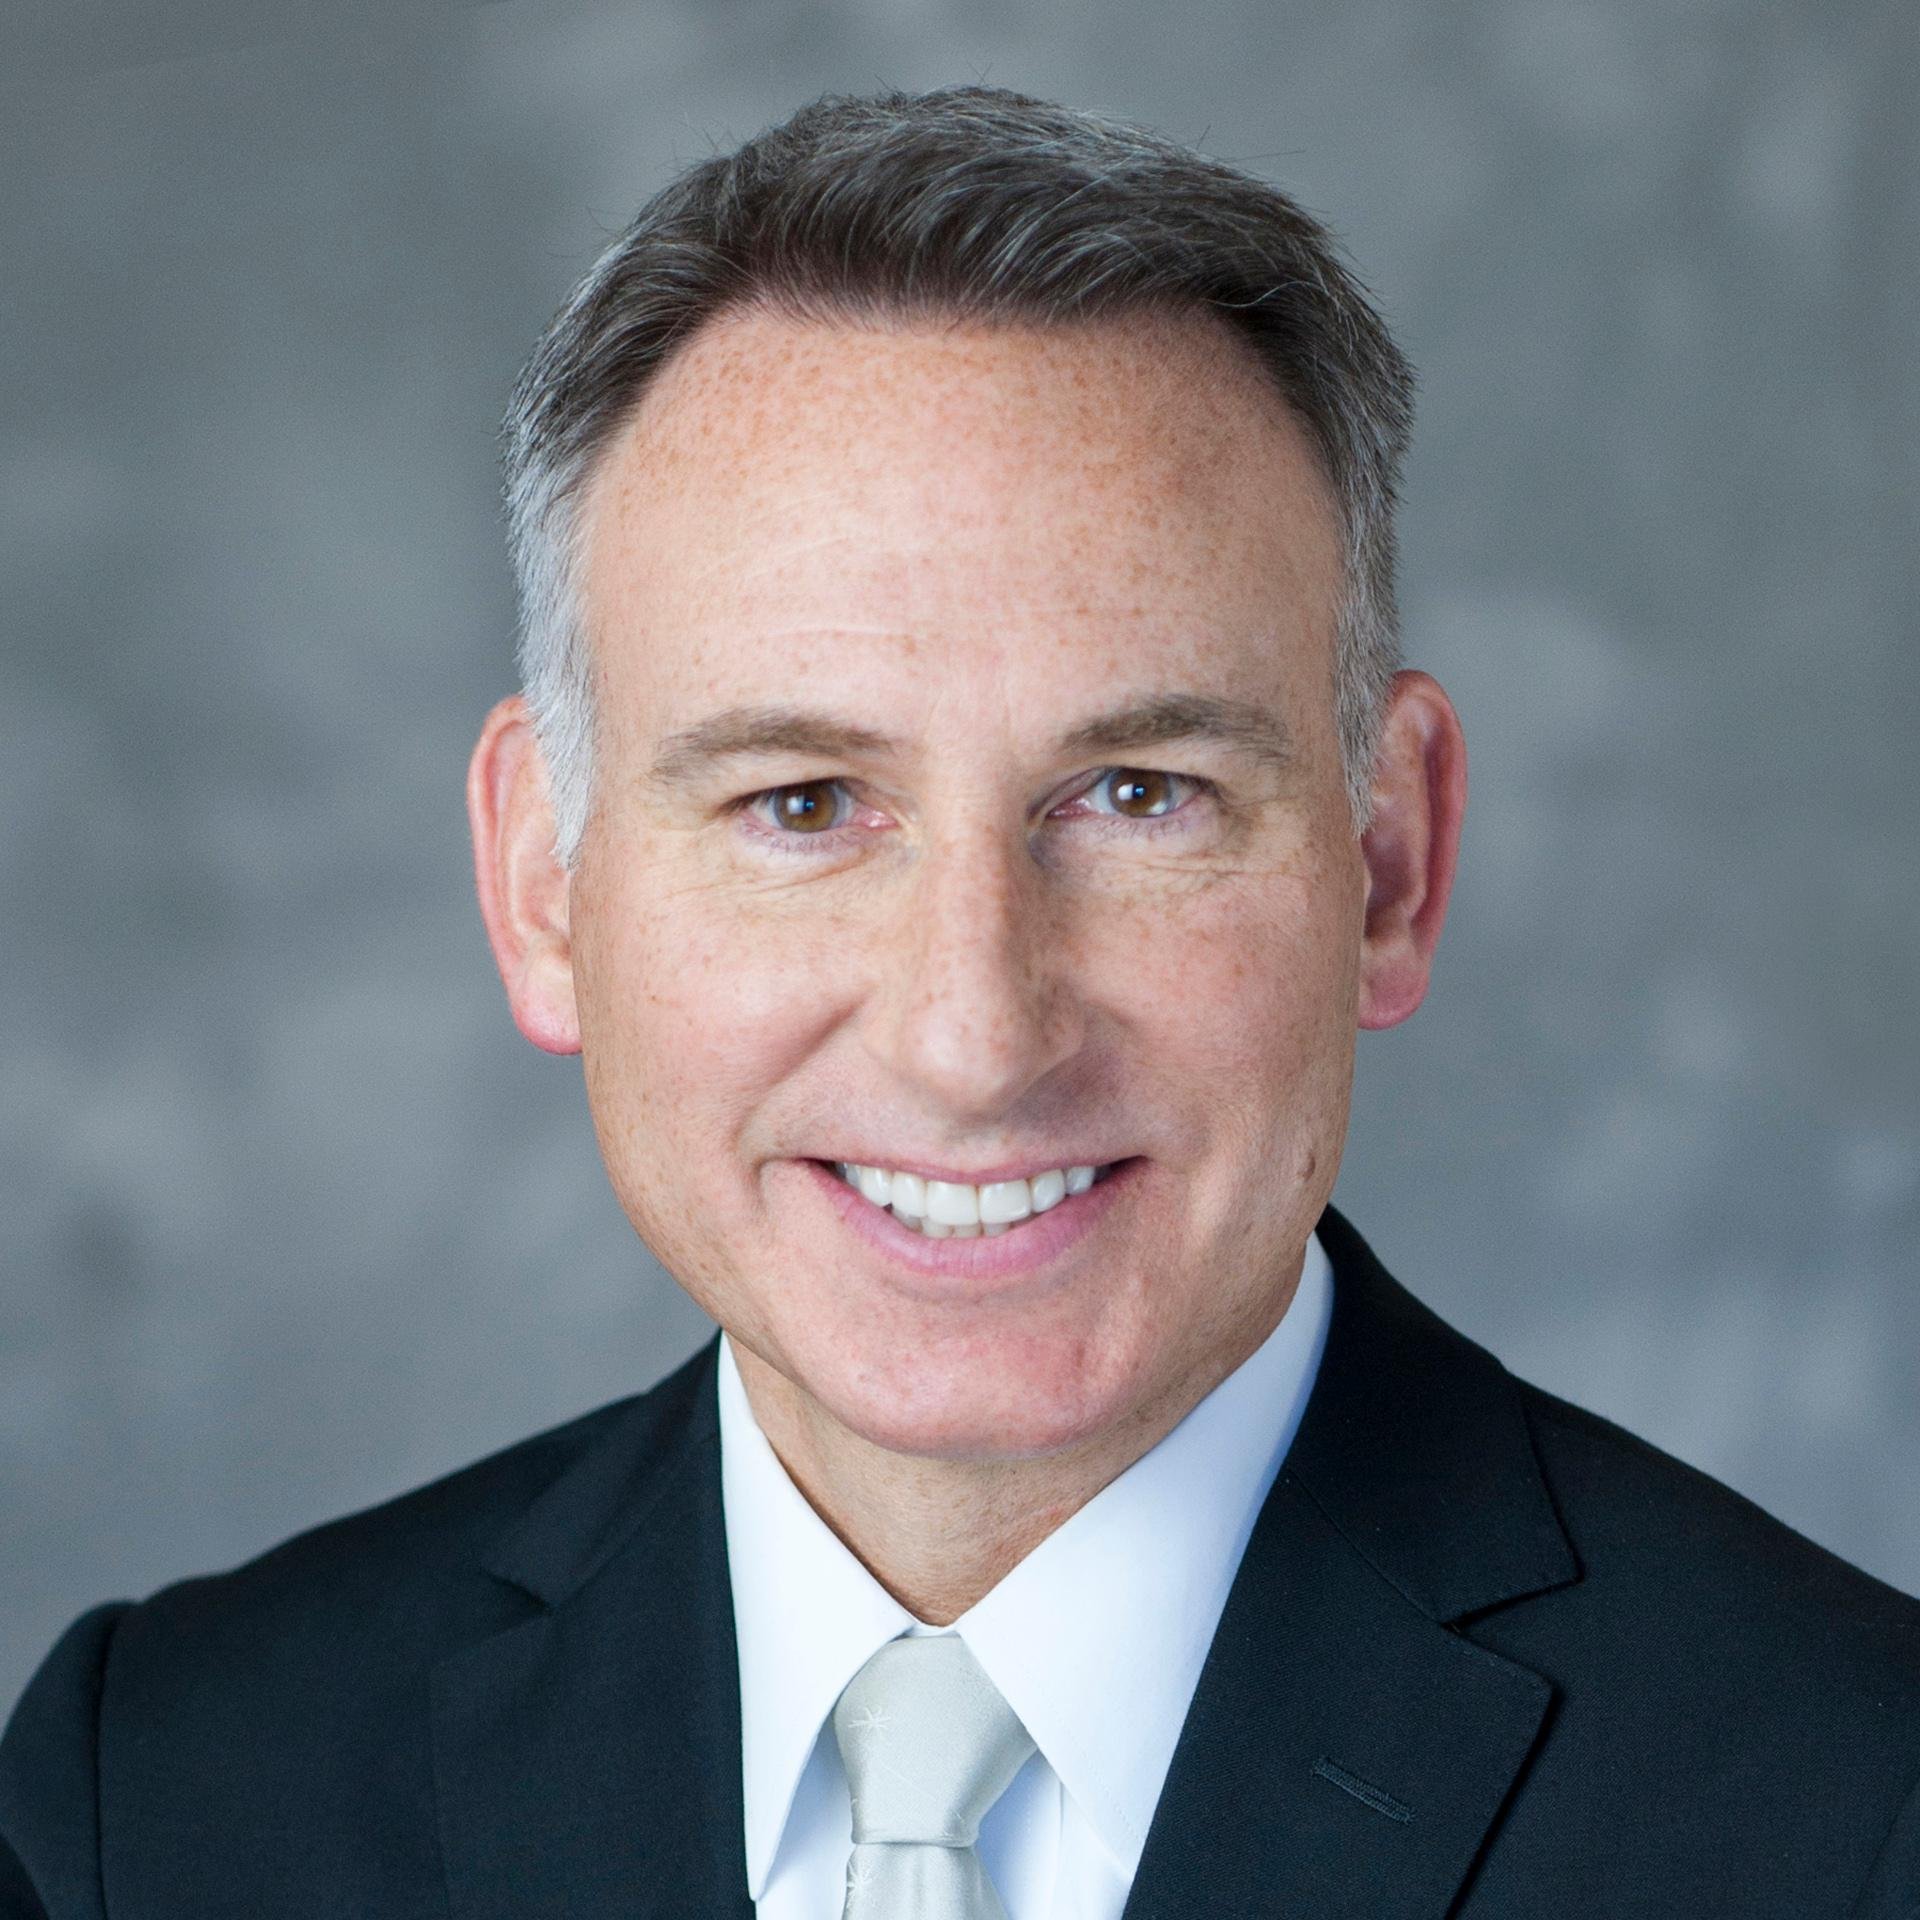 Official Twitter account of King County Executive Dow Constantine. This account is no longer actively monitored. Stay in touch: https://t.co/FI4A2bPSr1